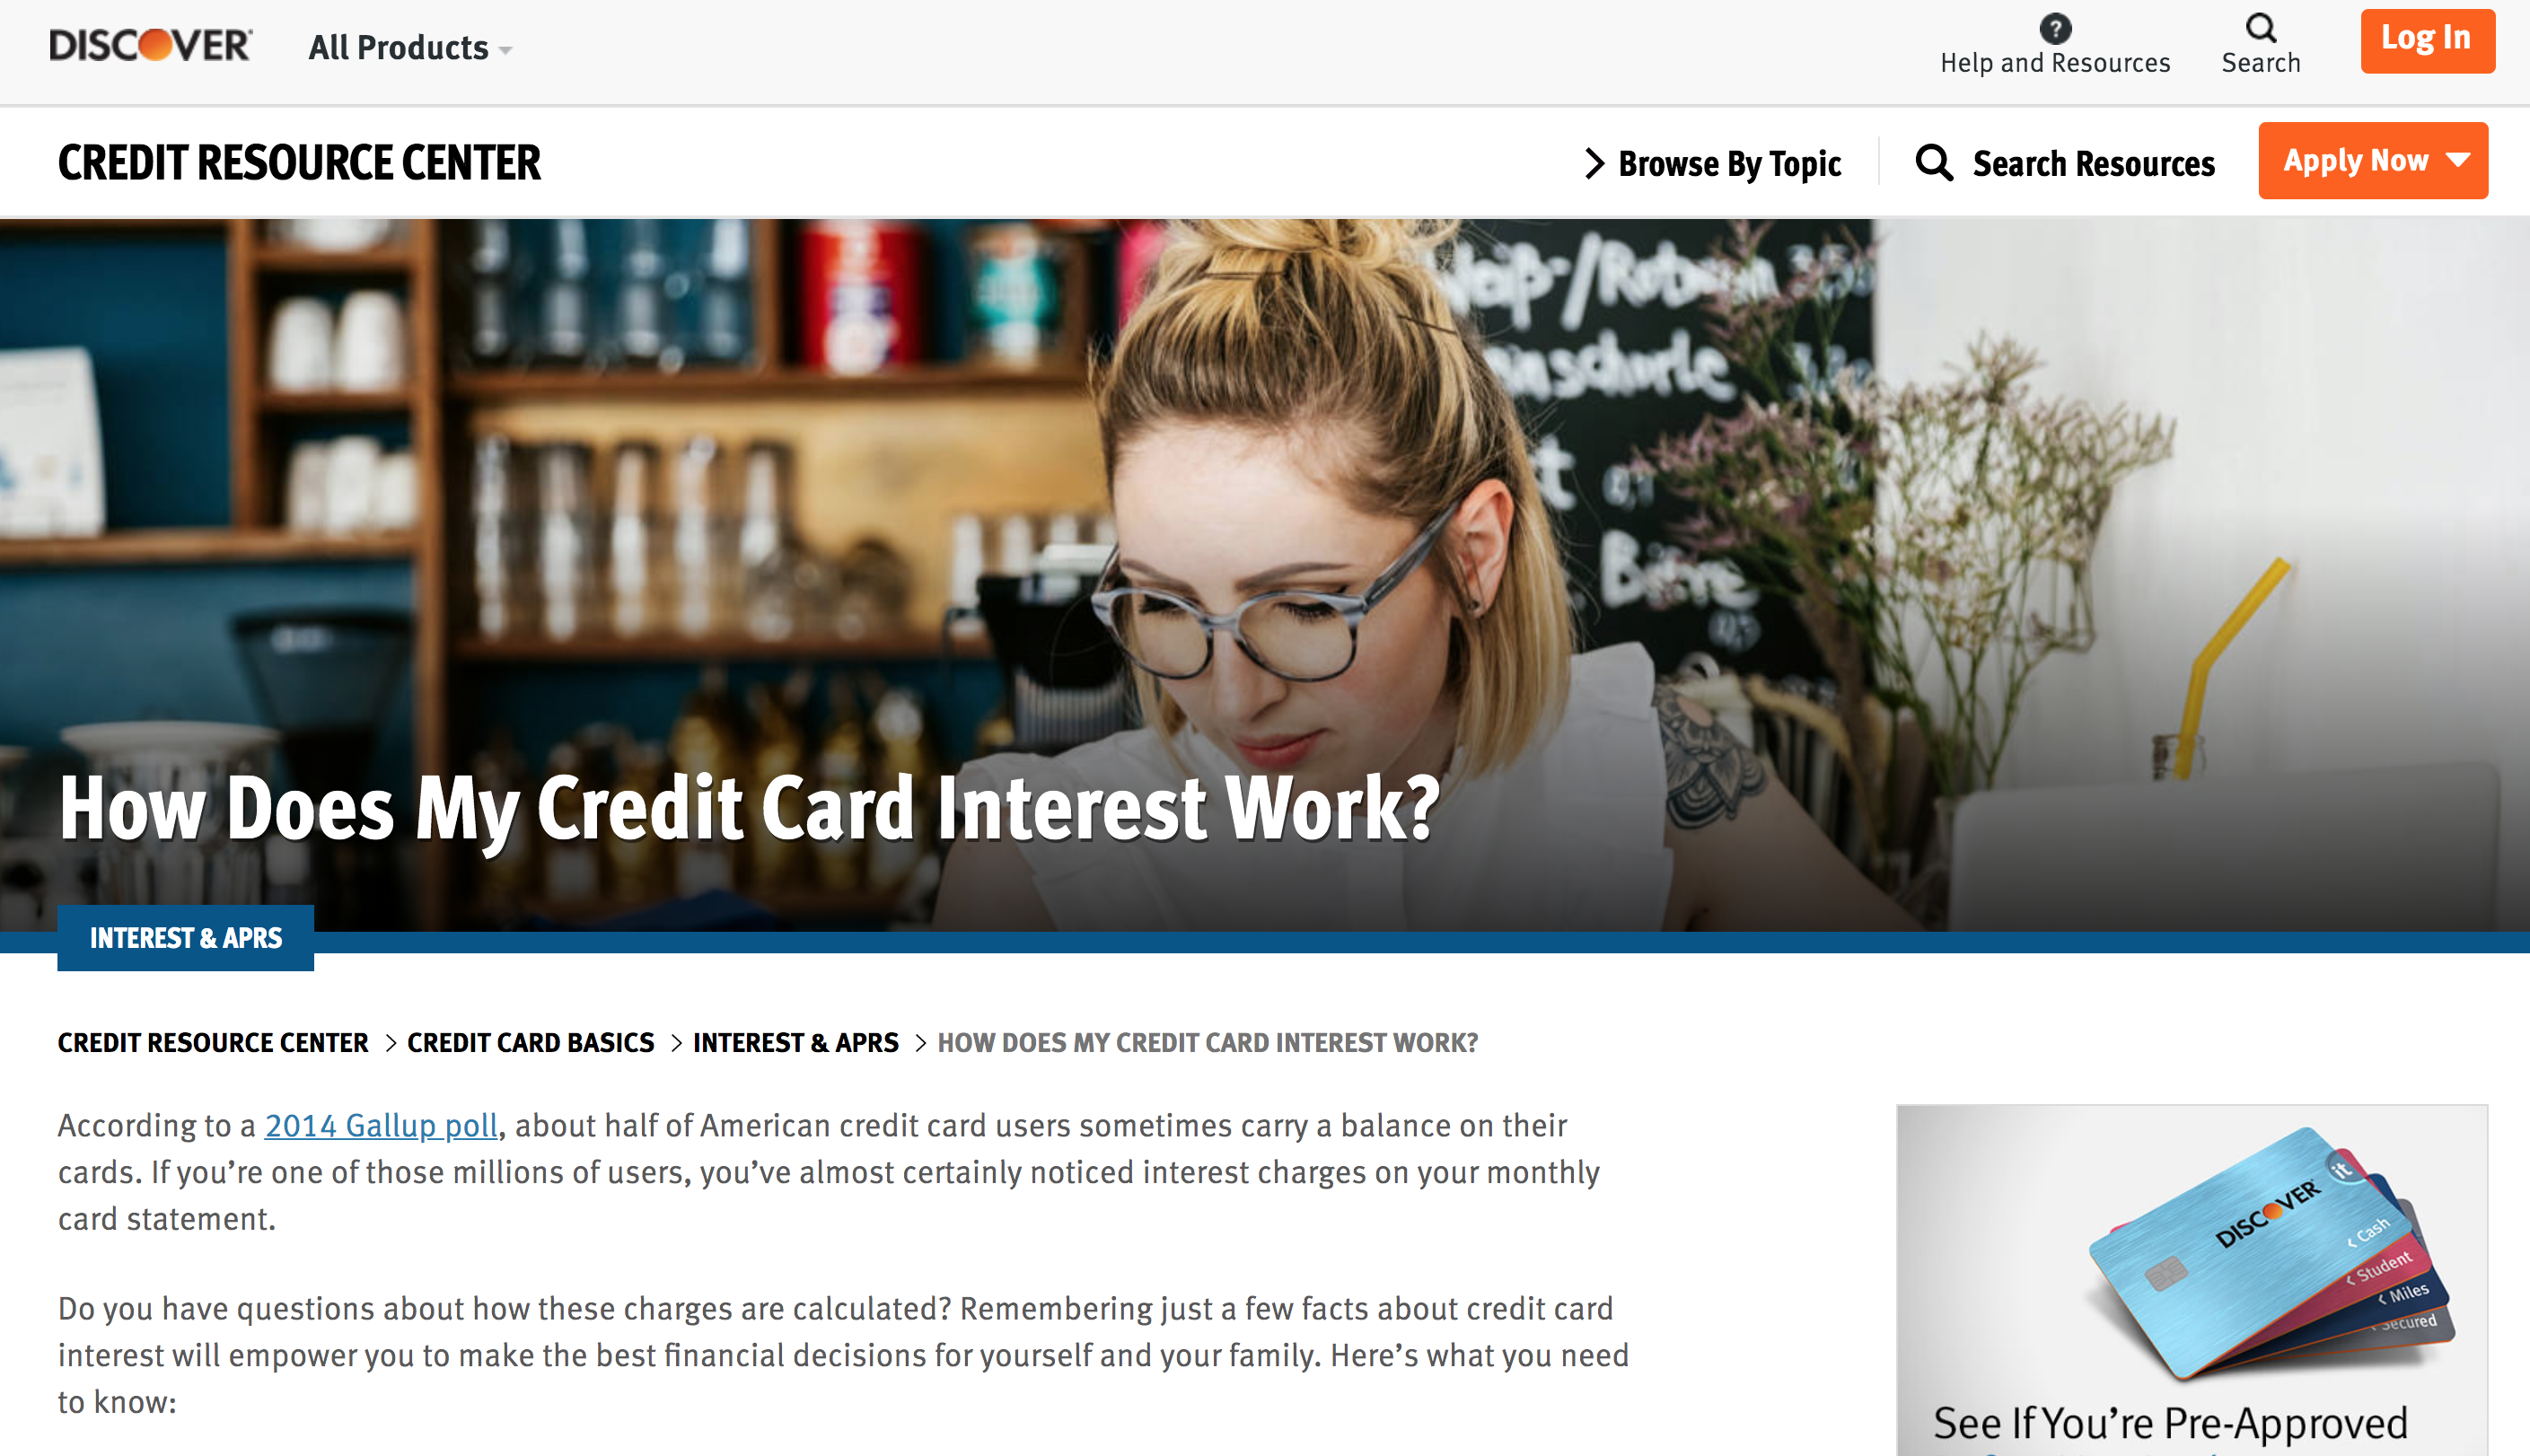 A redirect to a new educational page for US credit card company Discover